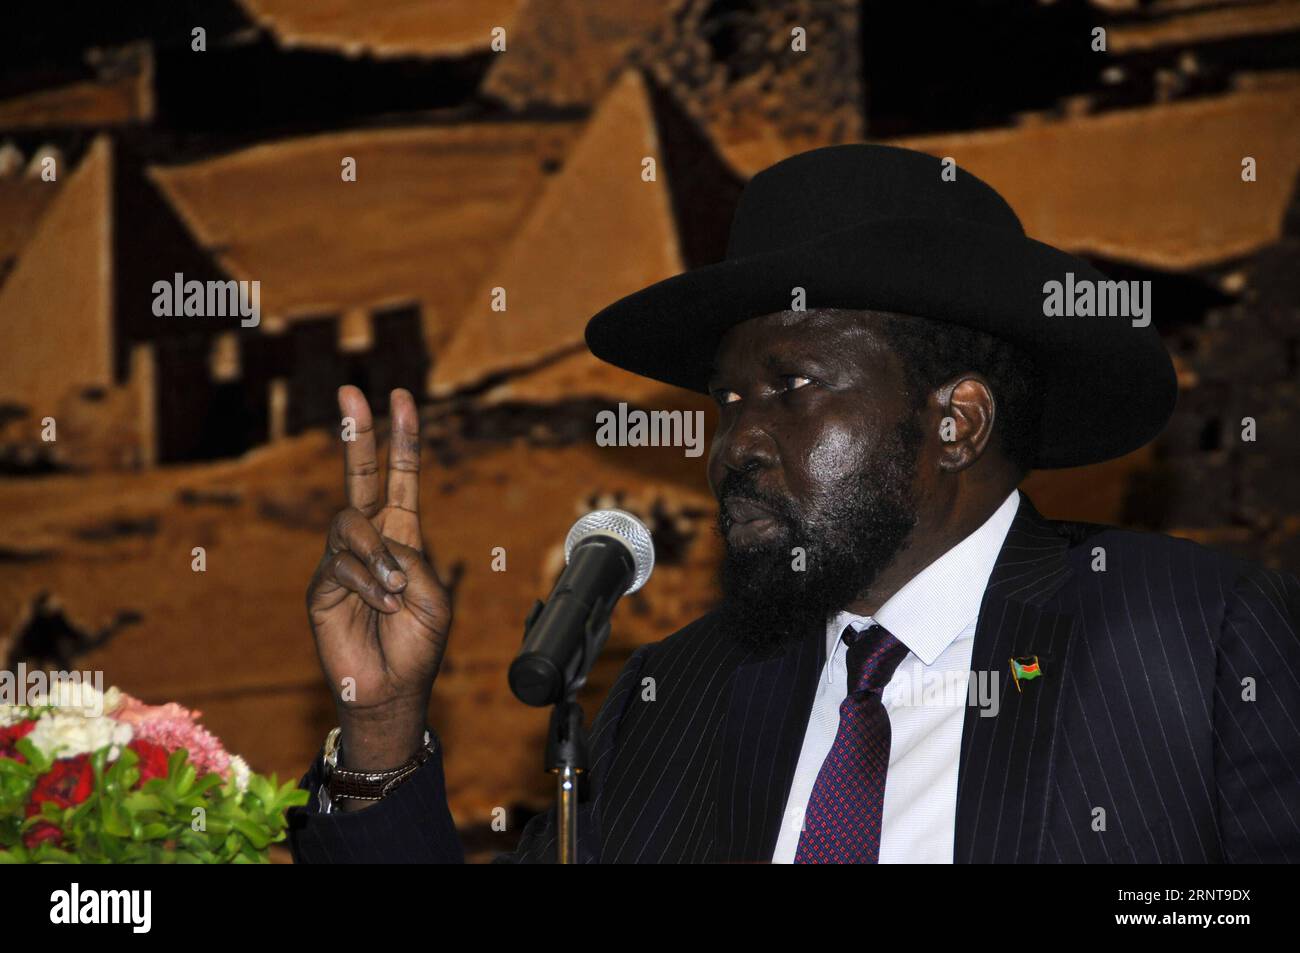 (171102) -- KHARTOUM, Nov. 2, 2017 -- South Sudanese President Salva Kiir Mayardit addresses a press conference in Khartoum, capital of Sudan, on Nov. 2, 2017. South Sudanese President Salva Kiir Mayardit on Thursday denied accusation against his country of supporting armed groups in Sudan. ) SUDAN-KHARTOUM-SOUTH SUDAN-SUDAN S ARMED OPPOSITION-SUPPORT-DENYING MohamedxKhidir PUBLICATIONxNOTxINxCHN Stock Photo